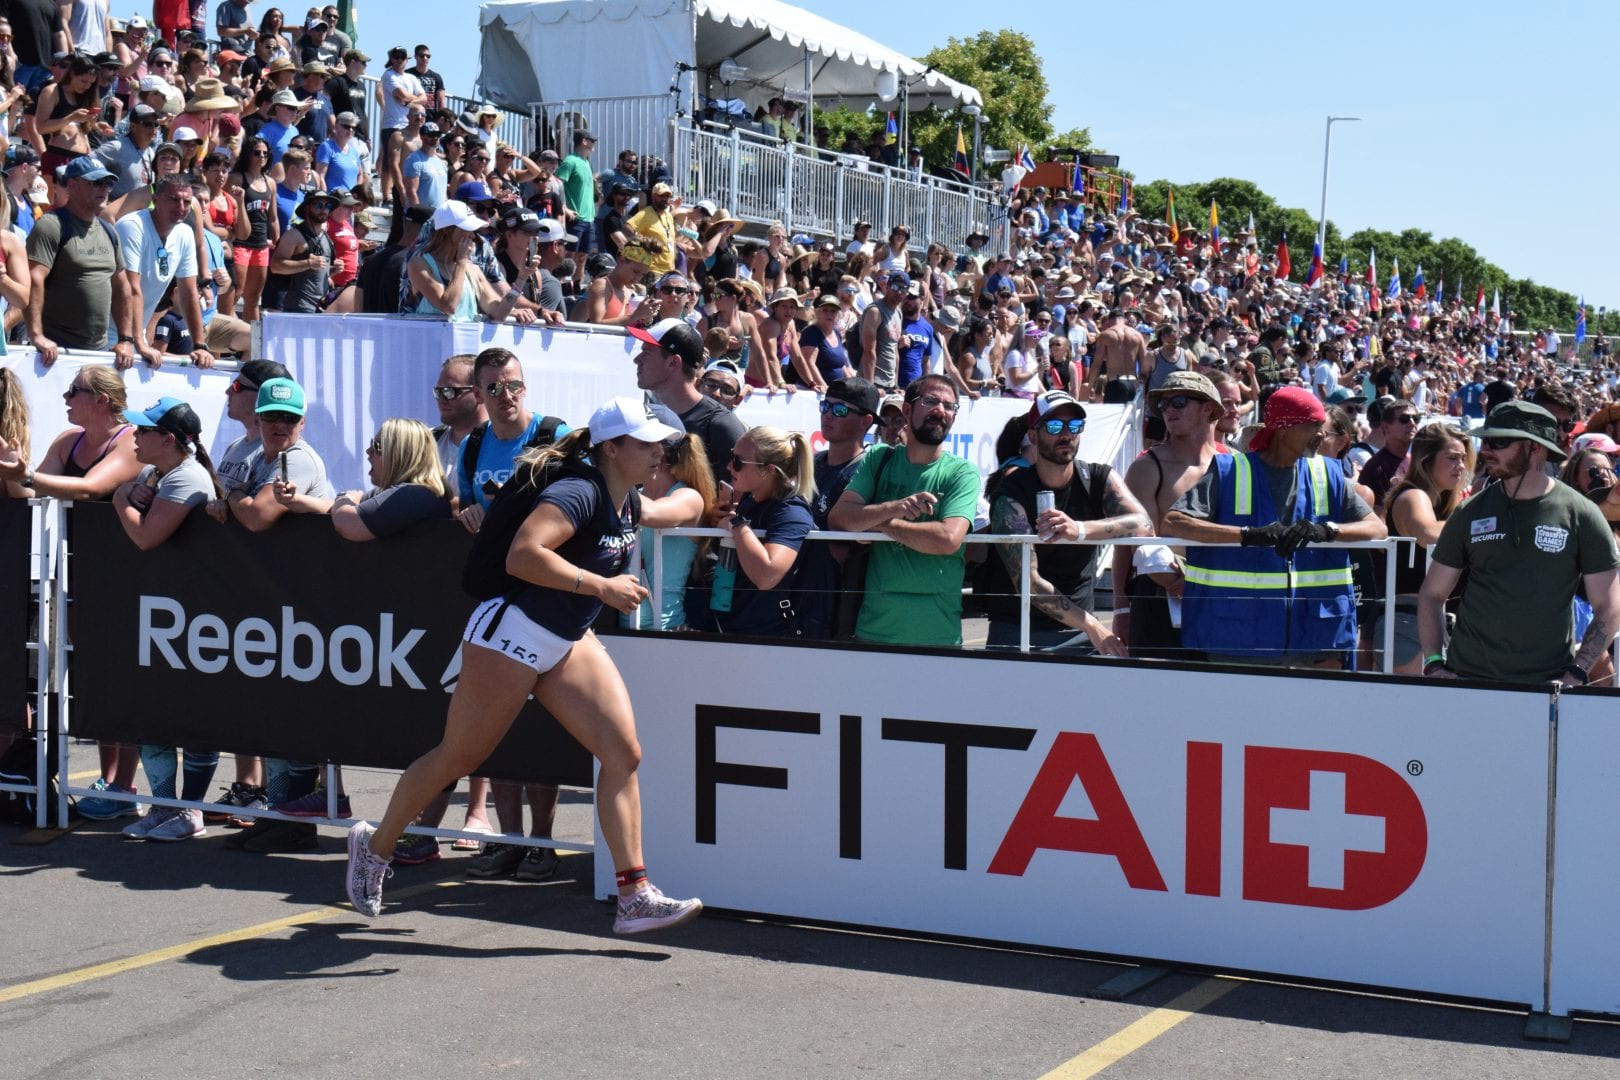 Laura Horvath completes the Ruck Run event at the 2019 CrossFit Games